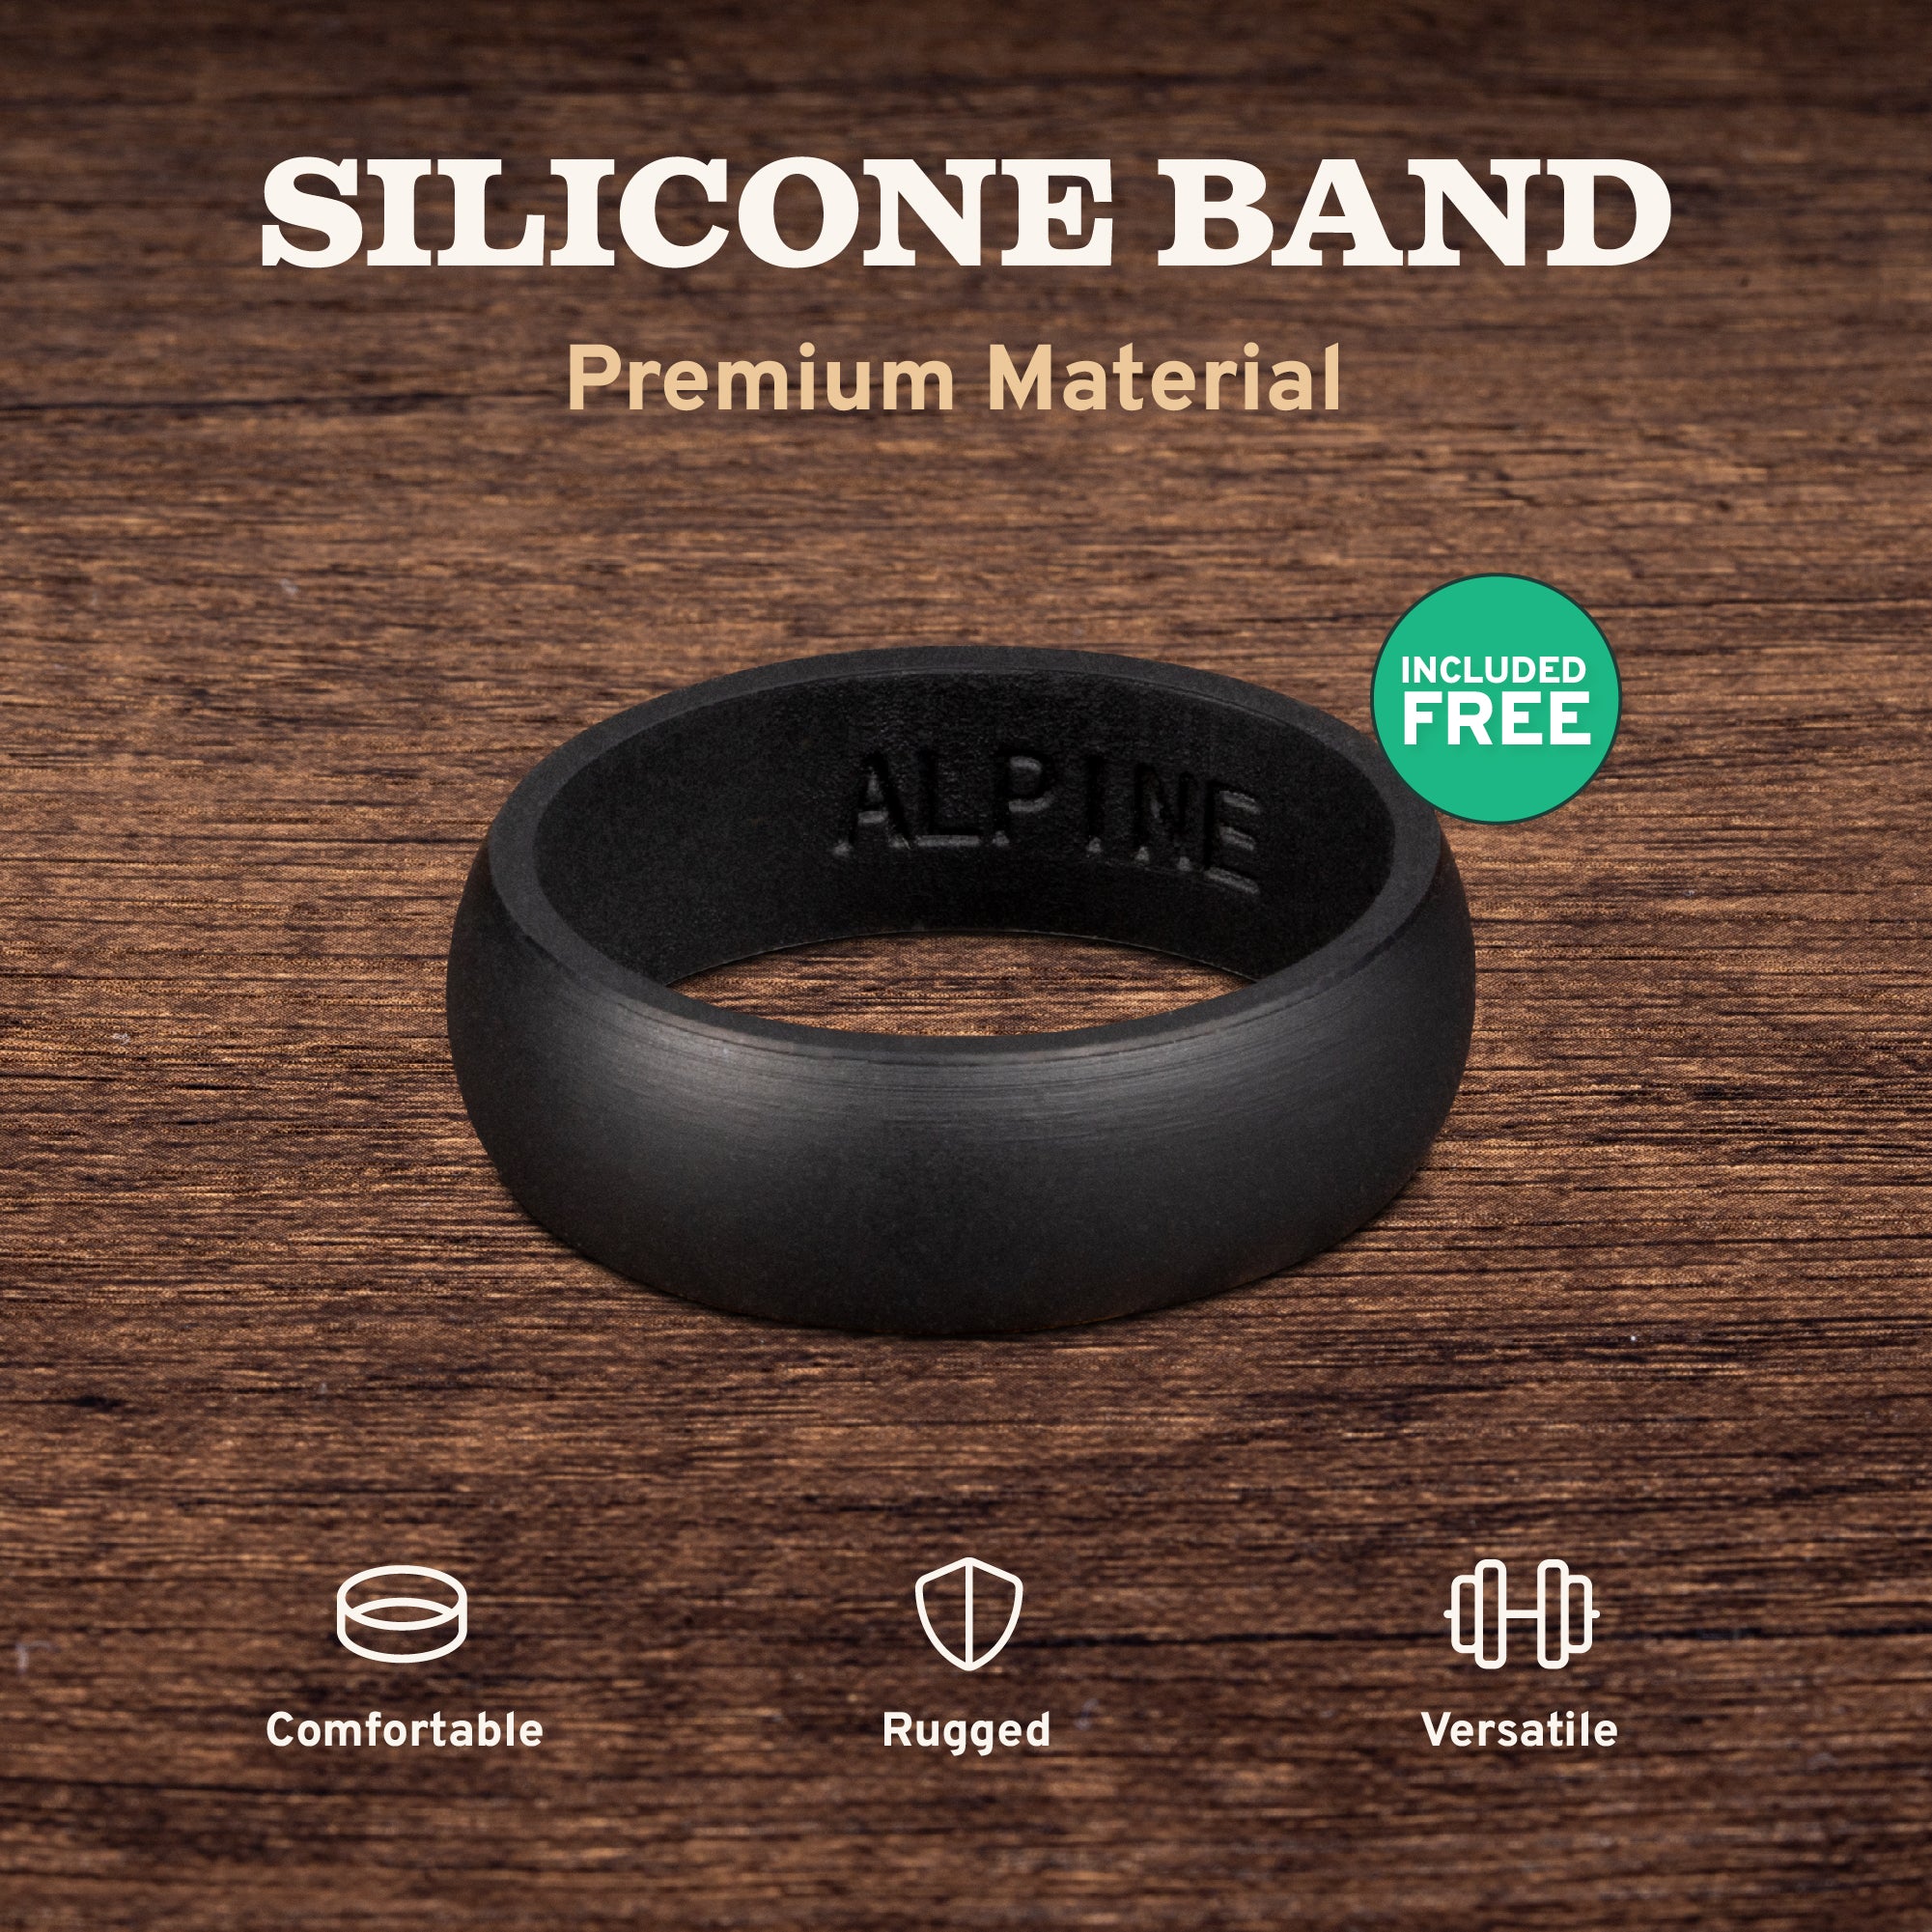 Black Tungsten Wedding Band With Deer Antler And Pear Wood 8MM